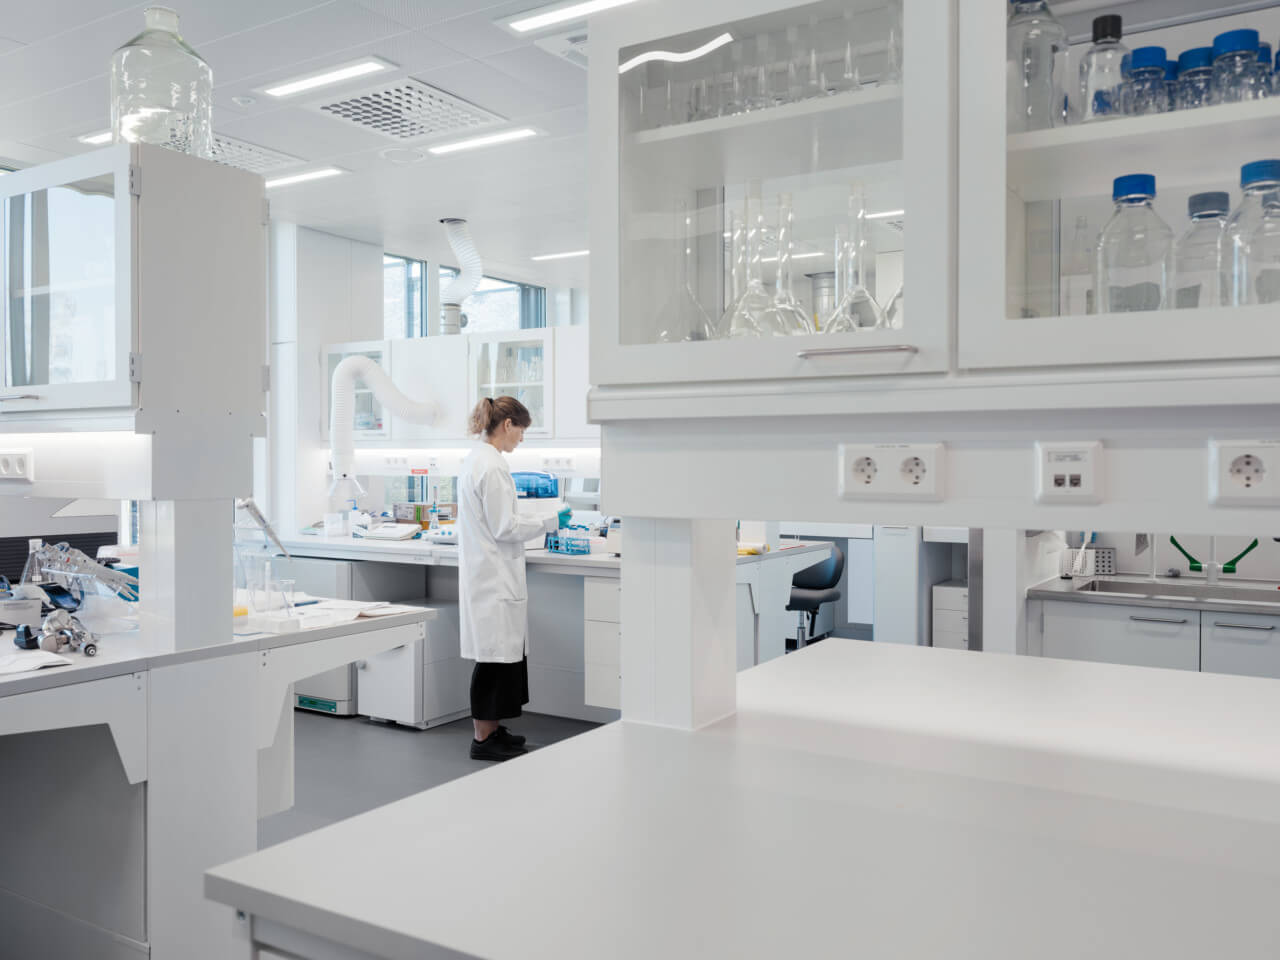 researchers work in a modern lab space